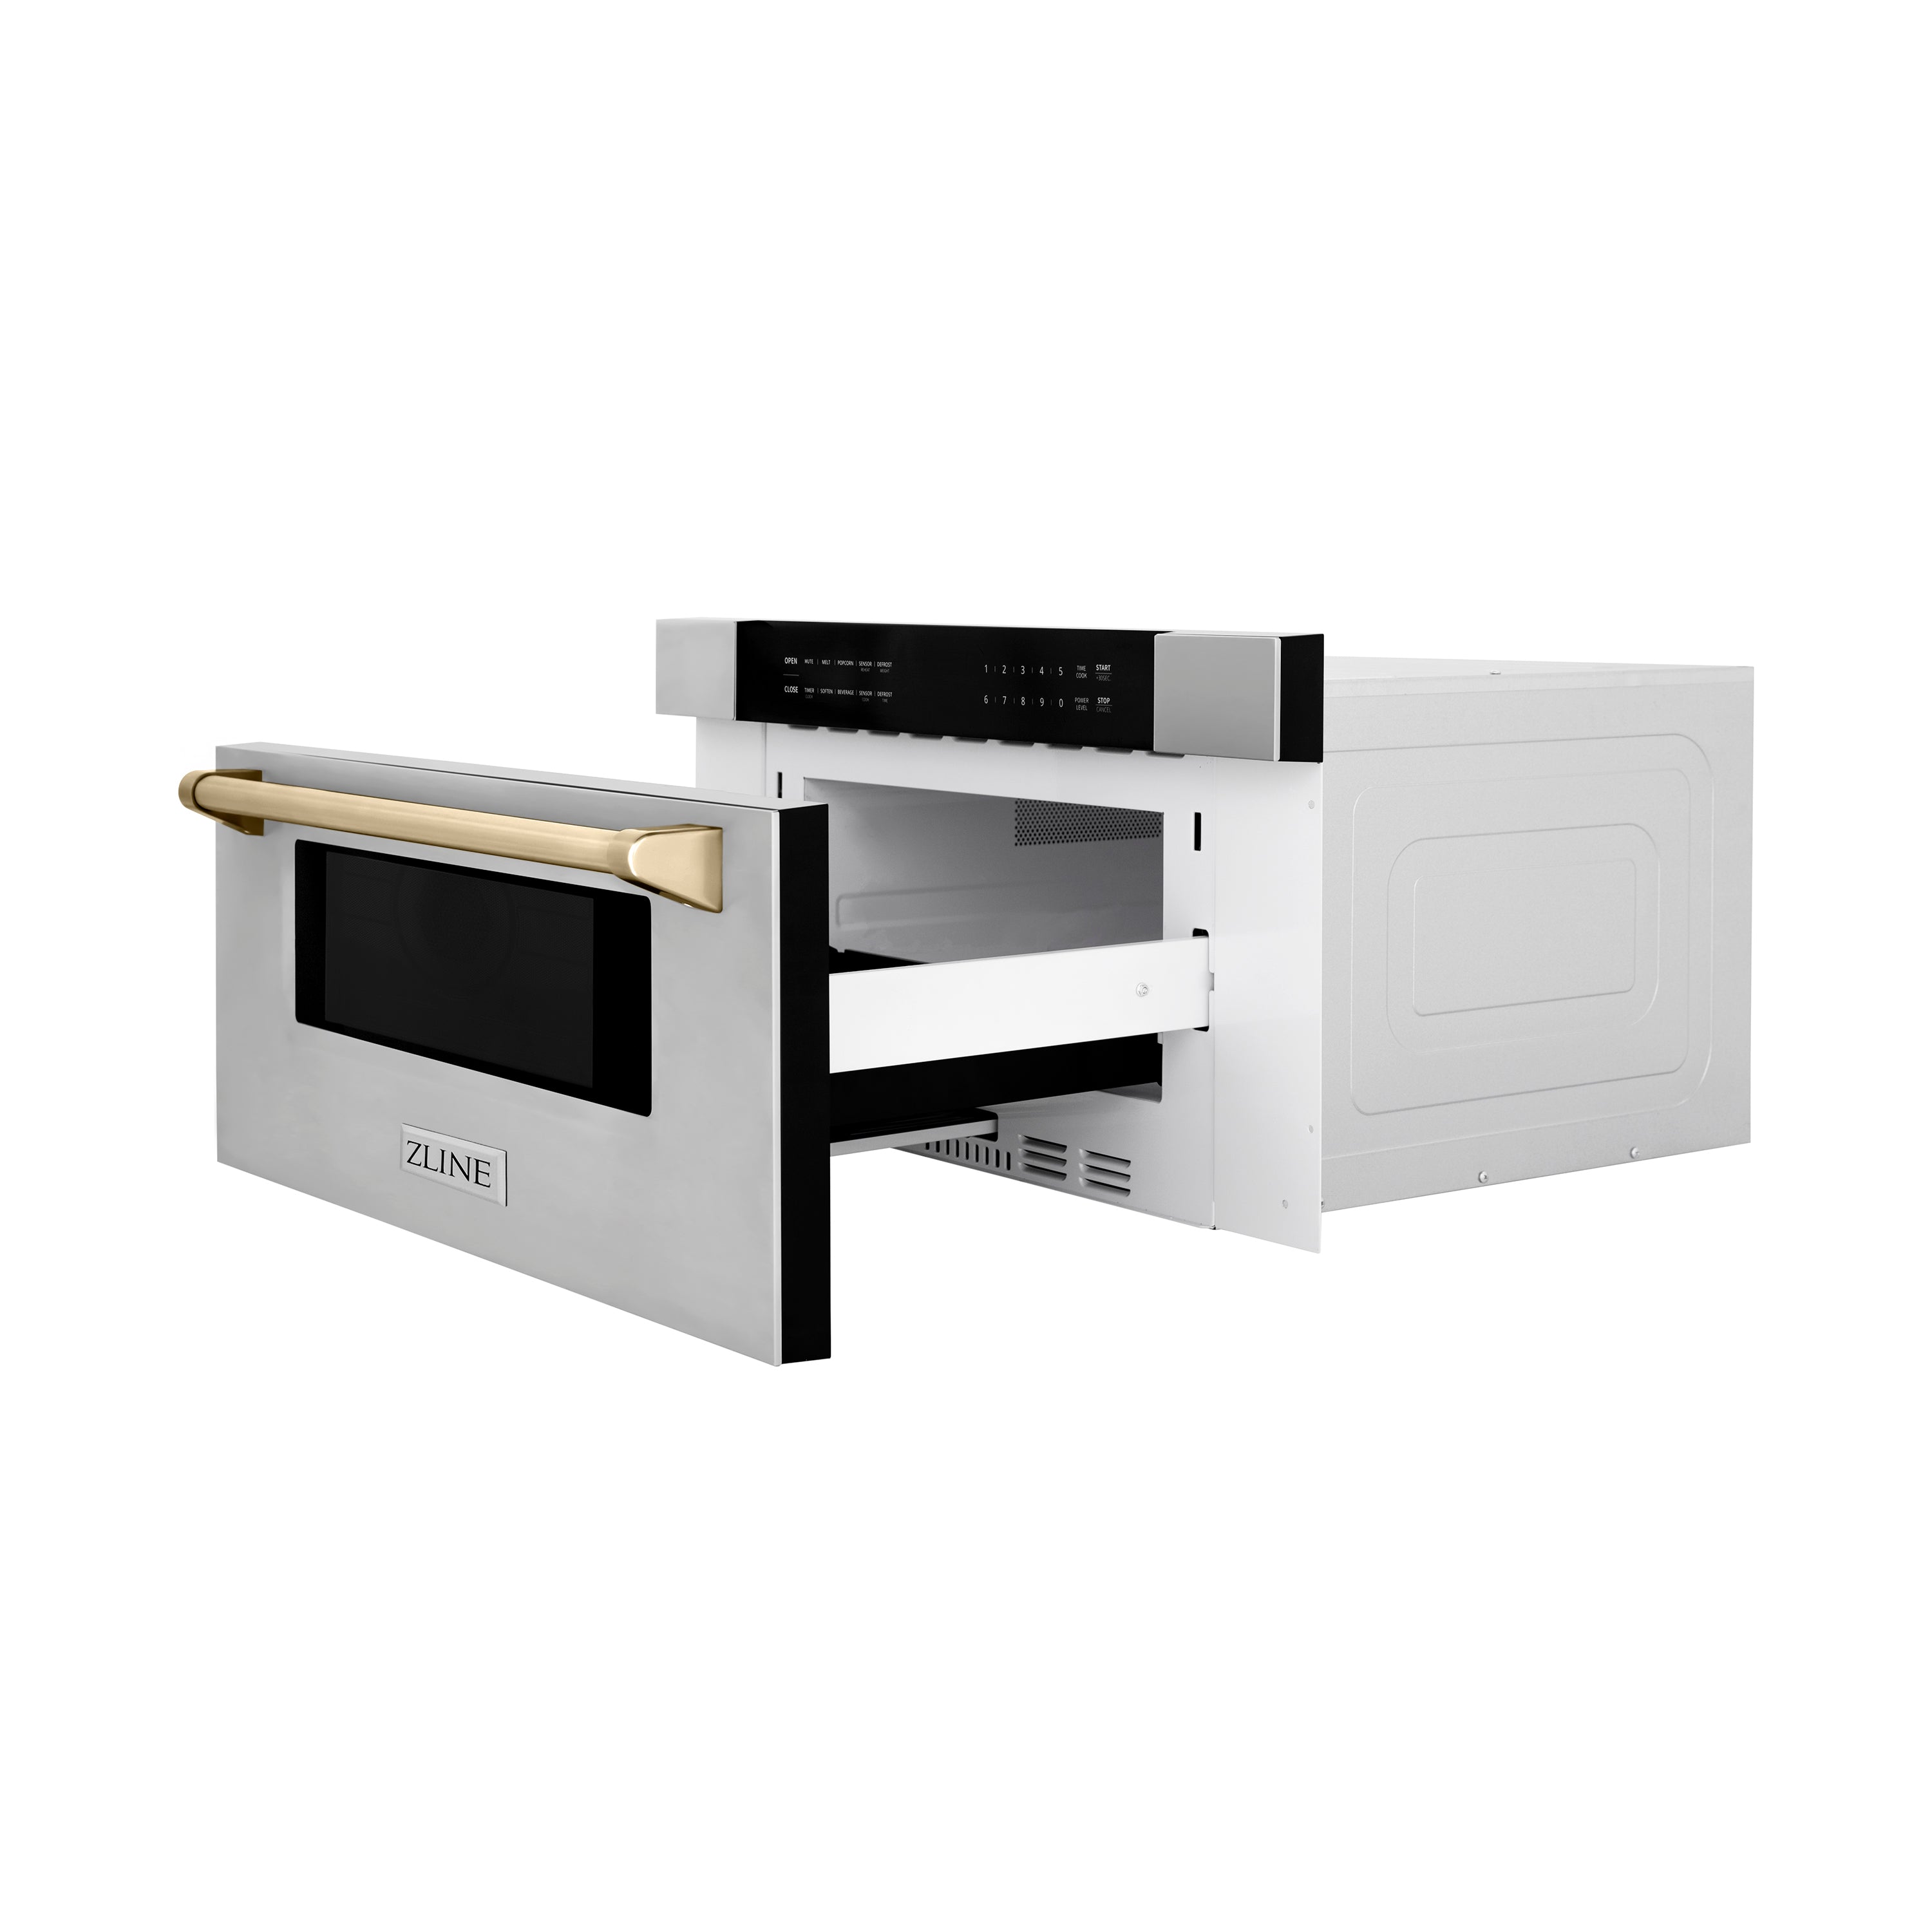 ZLINE Autograph Edition 30 in. 1.2 cu. ft. Built-In Microwave Drawer in Stainless Steel with Polished Gold Accents (MWDZ-30-G) side, fully open.